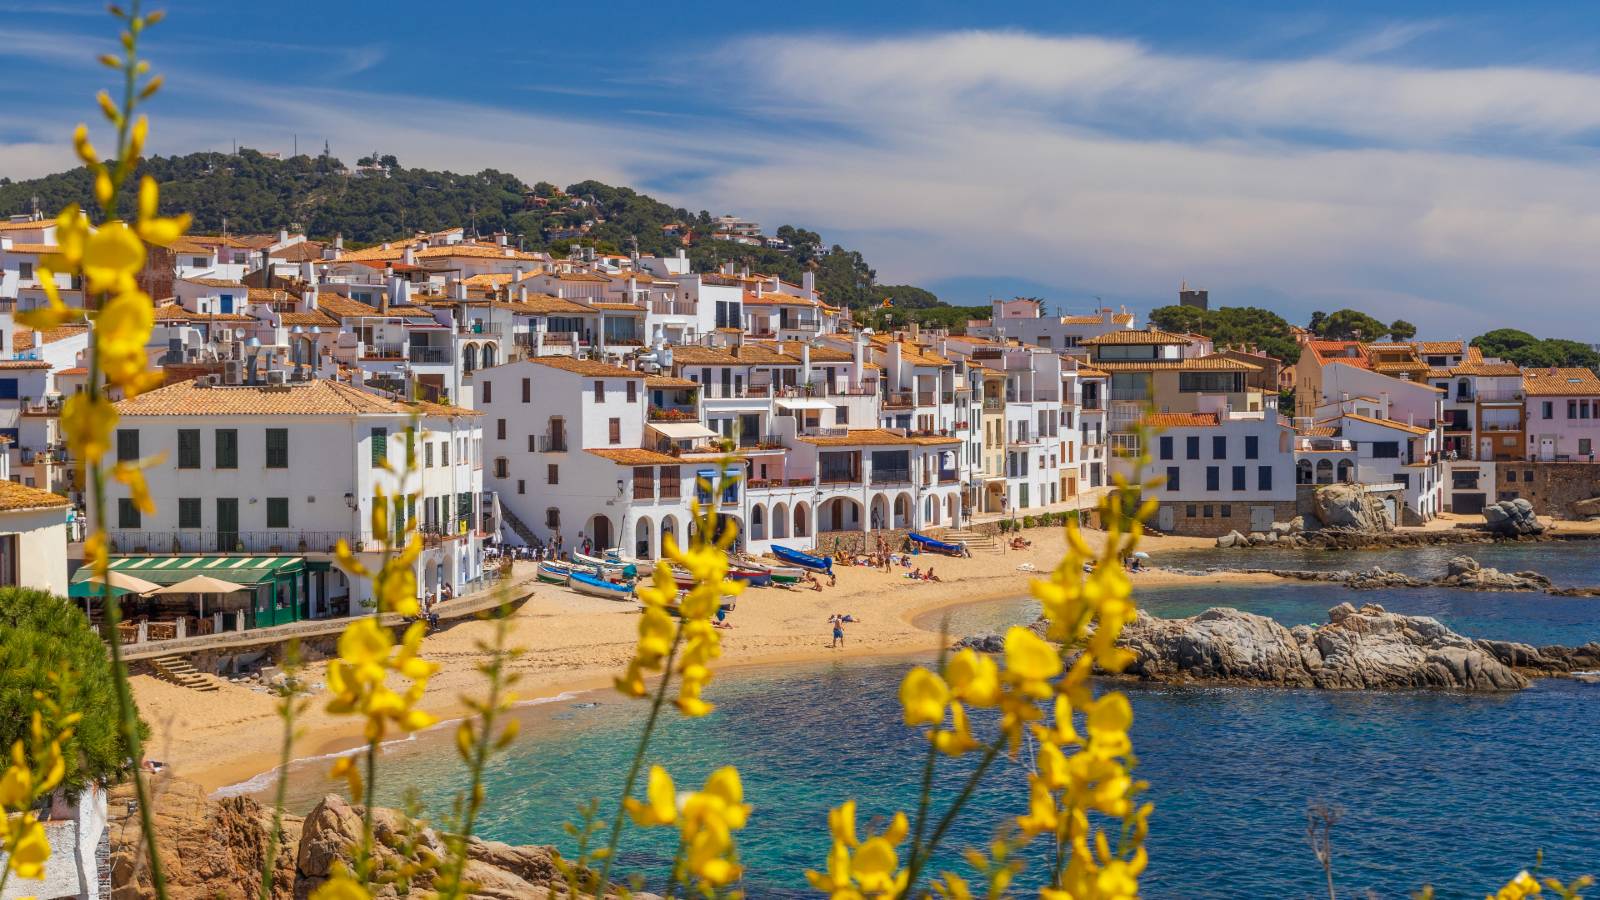 CurrencyFair Community: John’s holiday home purchase in Spain